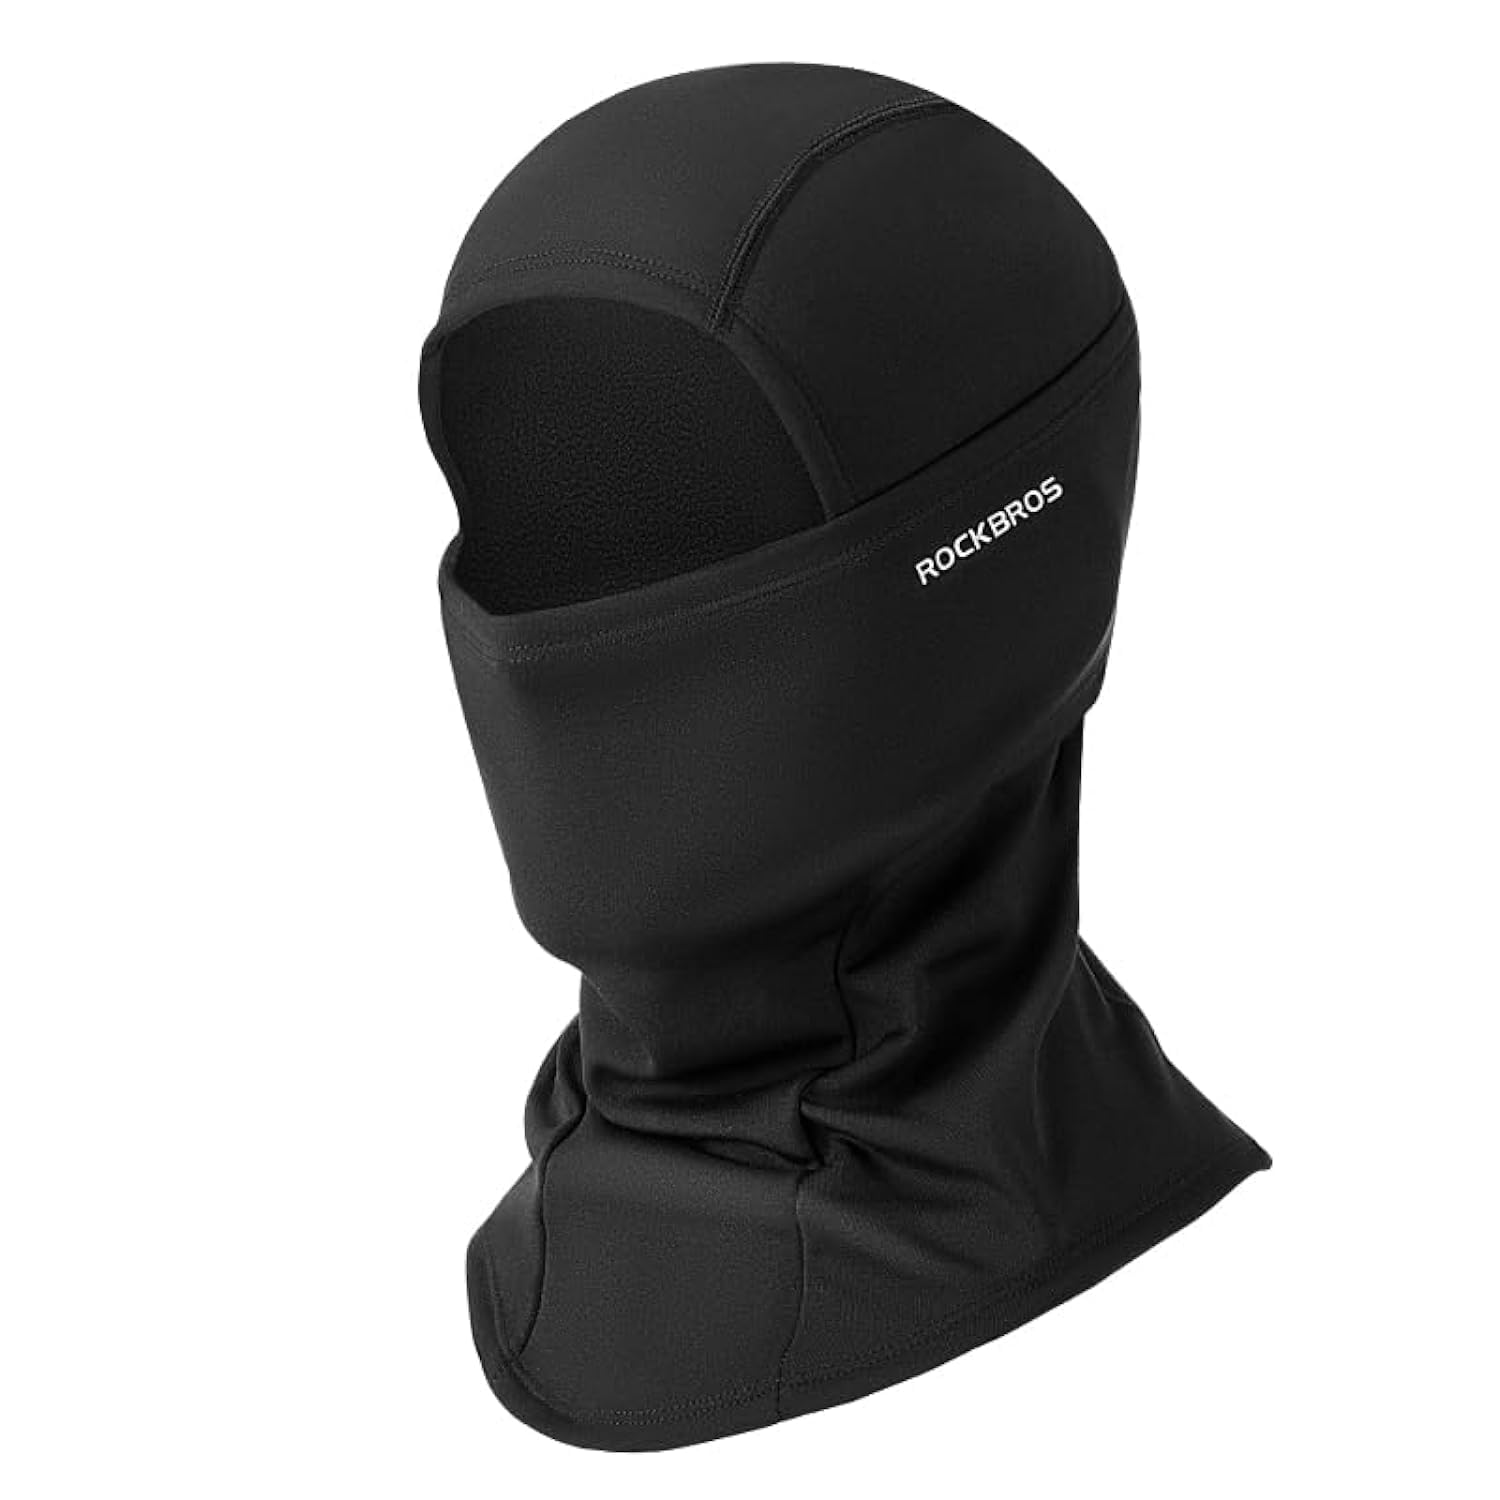 ROCKBROS Windproof Full Face Mask Thermal Balaclava for Cycling & Ski